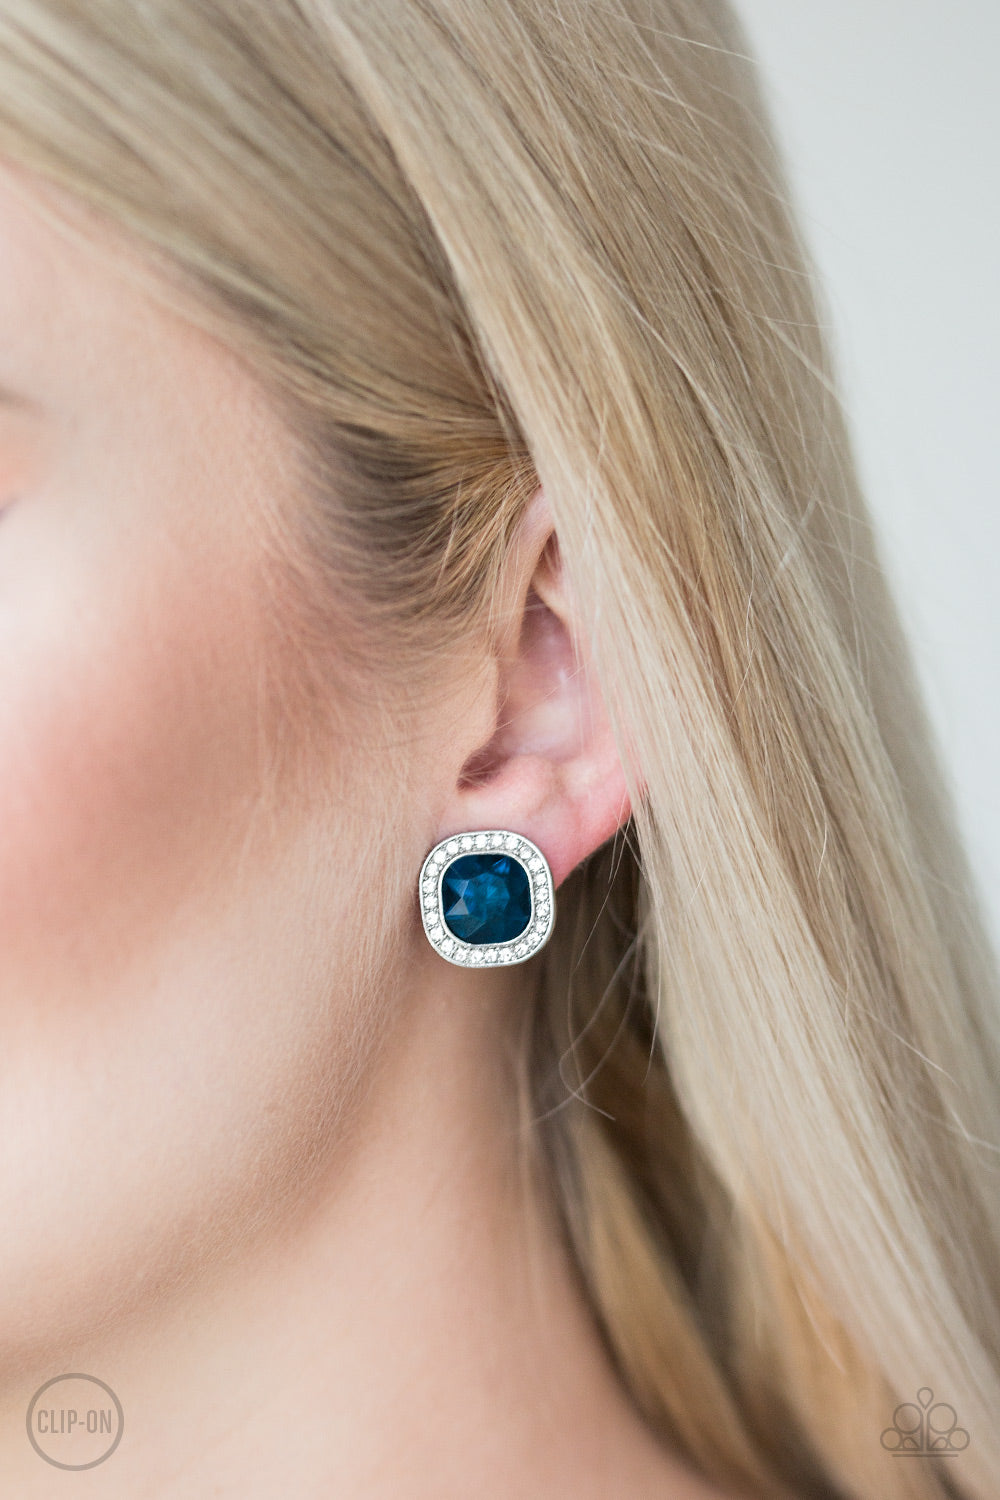 The Fame Game Clip-On Earrings - Blue